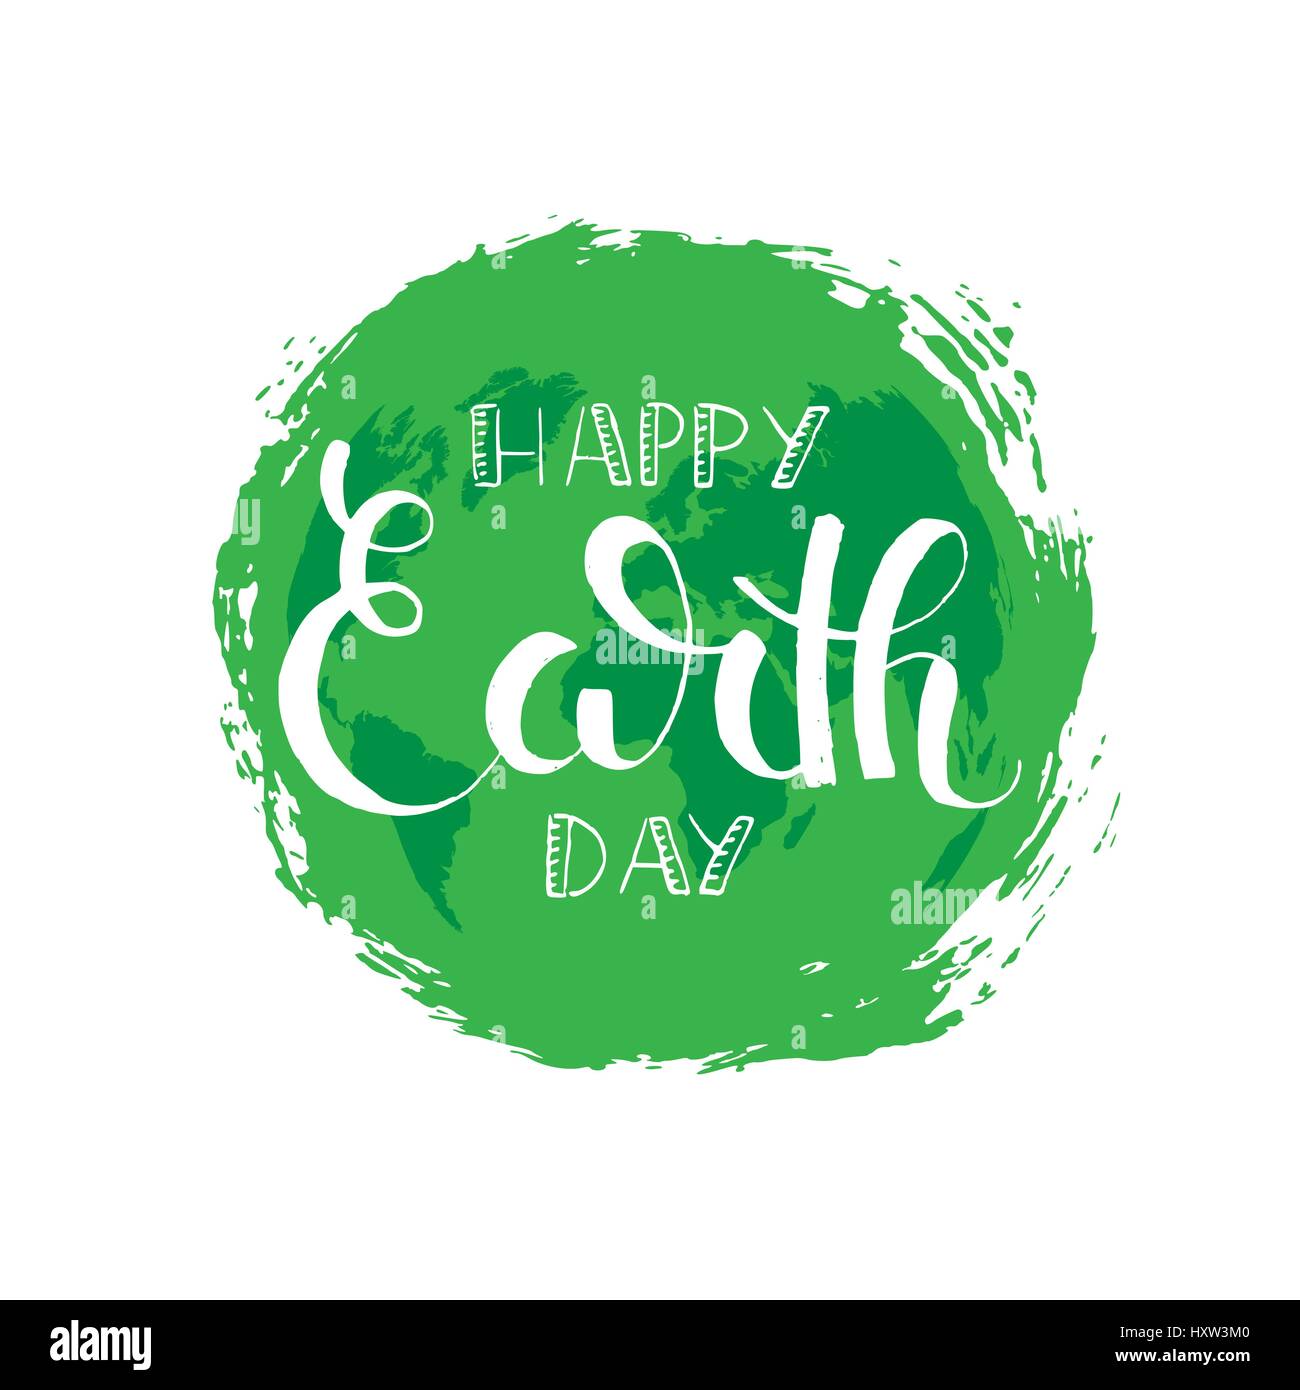 Happy Earth day brush pen handwritten lettering. April 22. Modern vector hand drawn calligraphy with brush texture isolated on white background Stock Vector